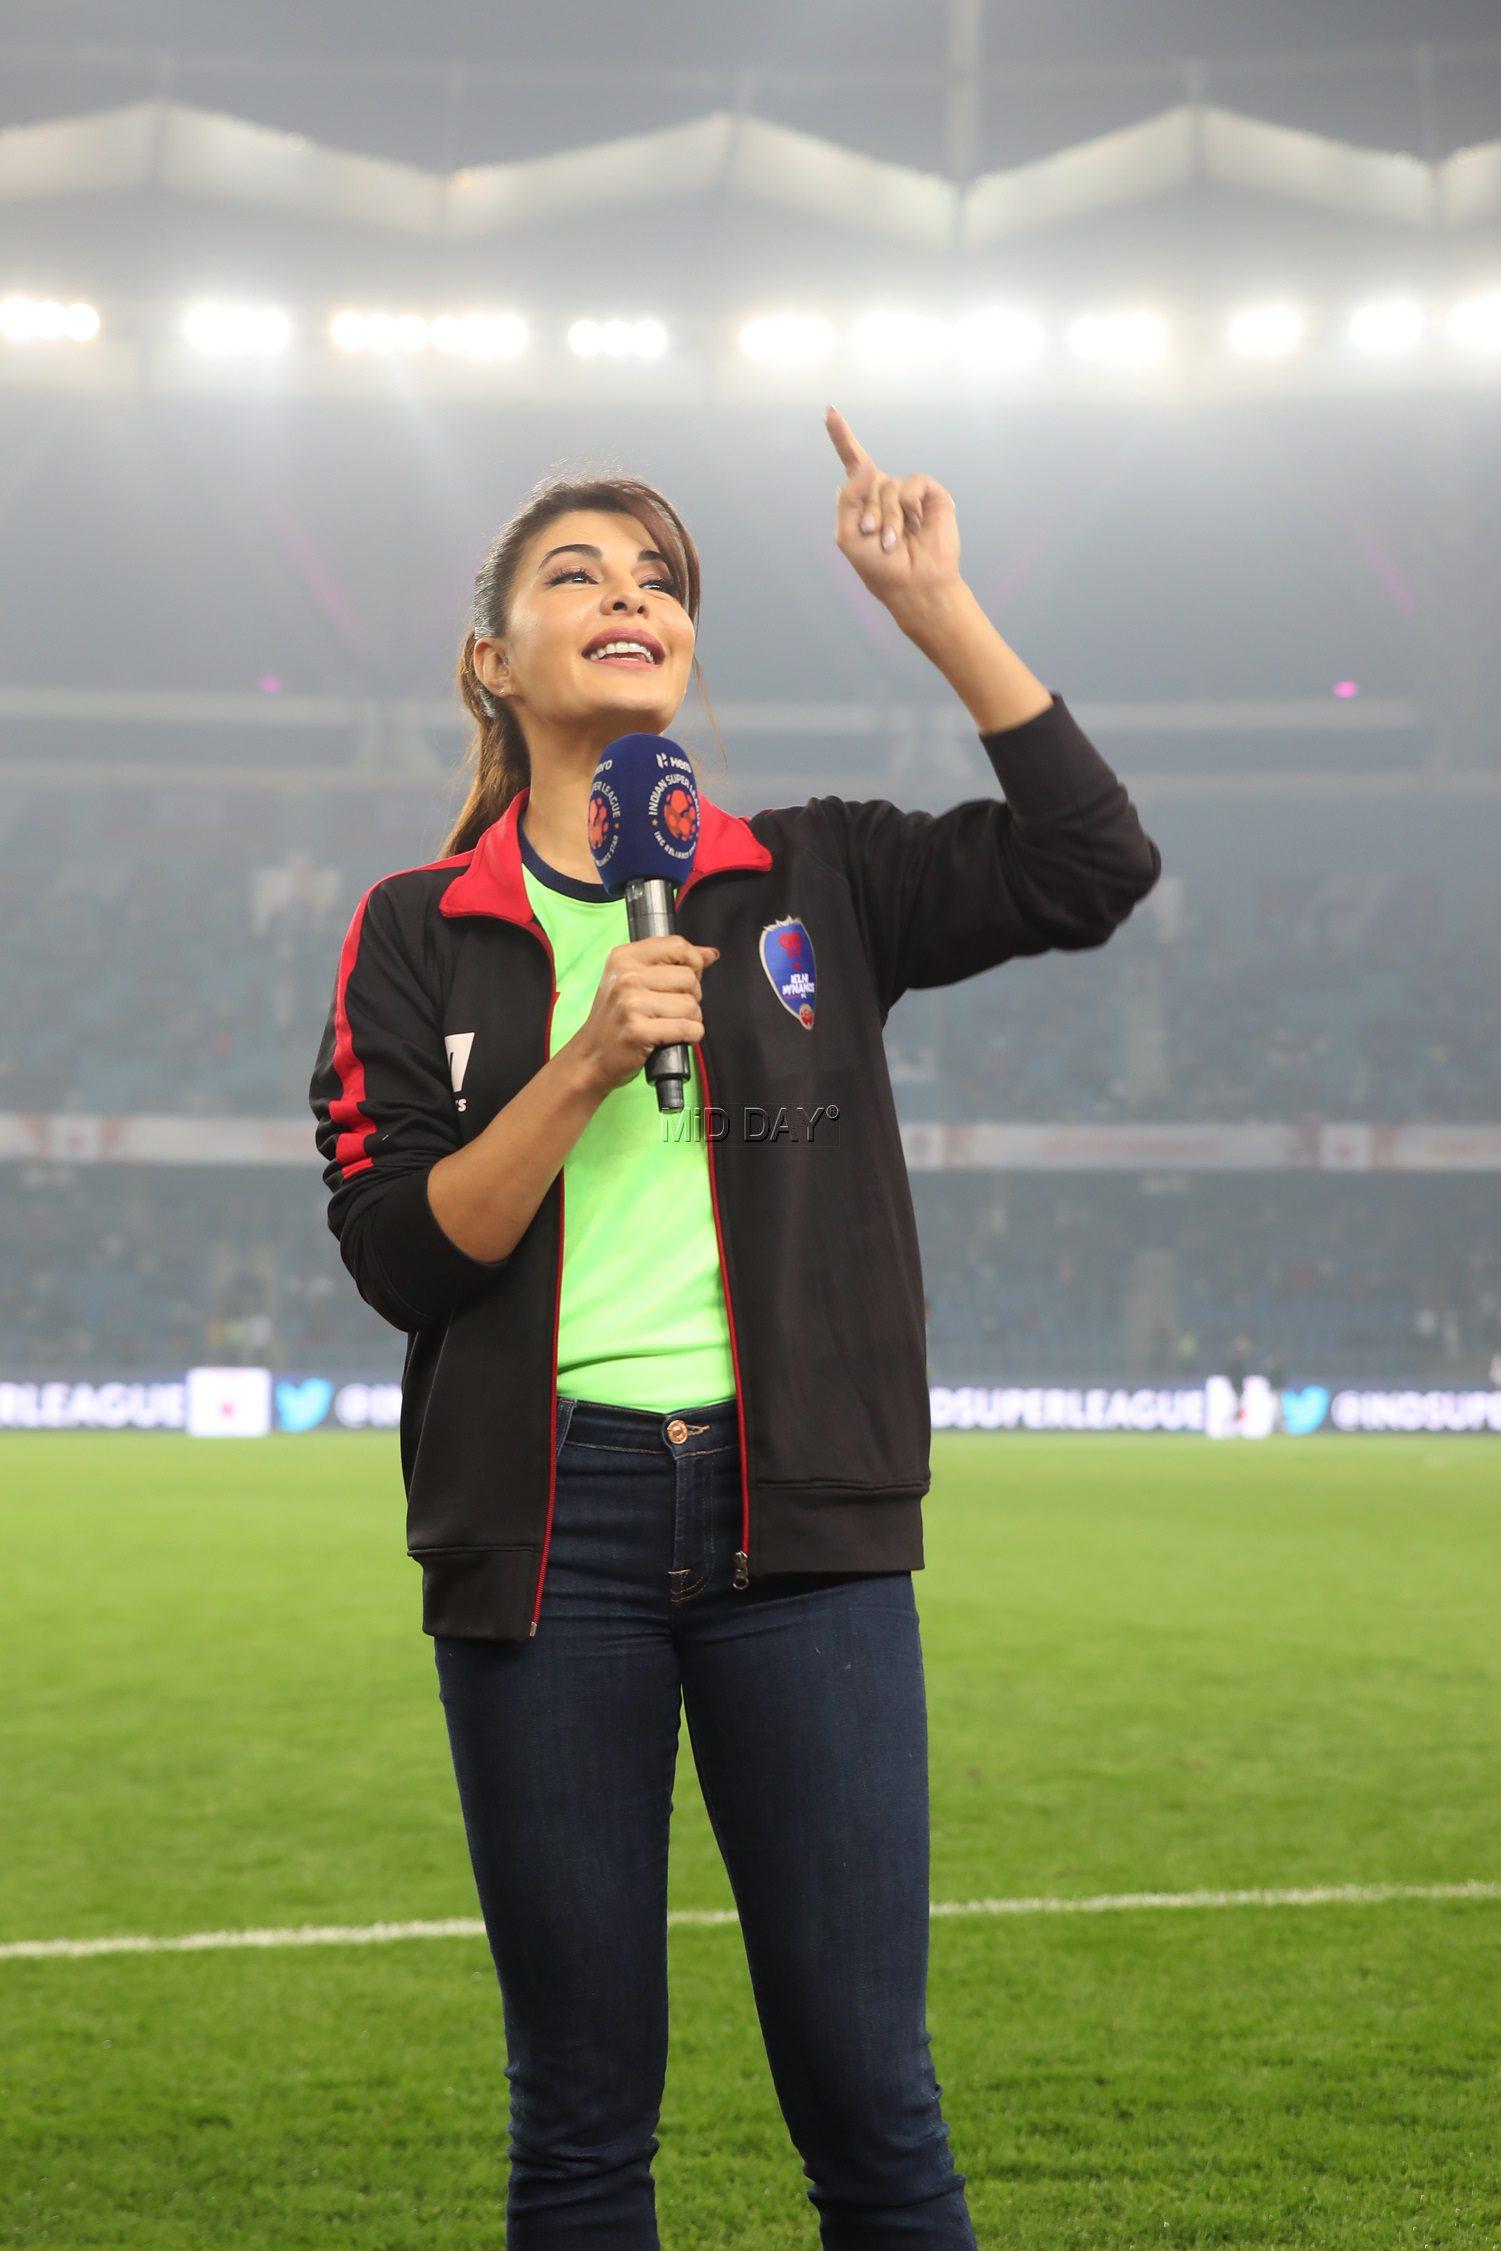 Jacqueline Fernandez addressing the crowd during the ISL match